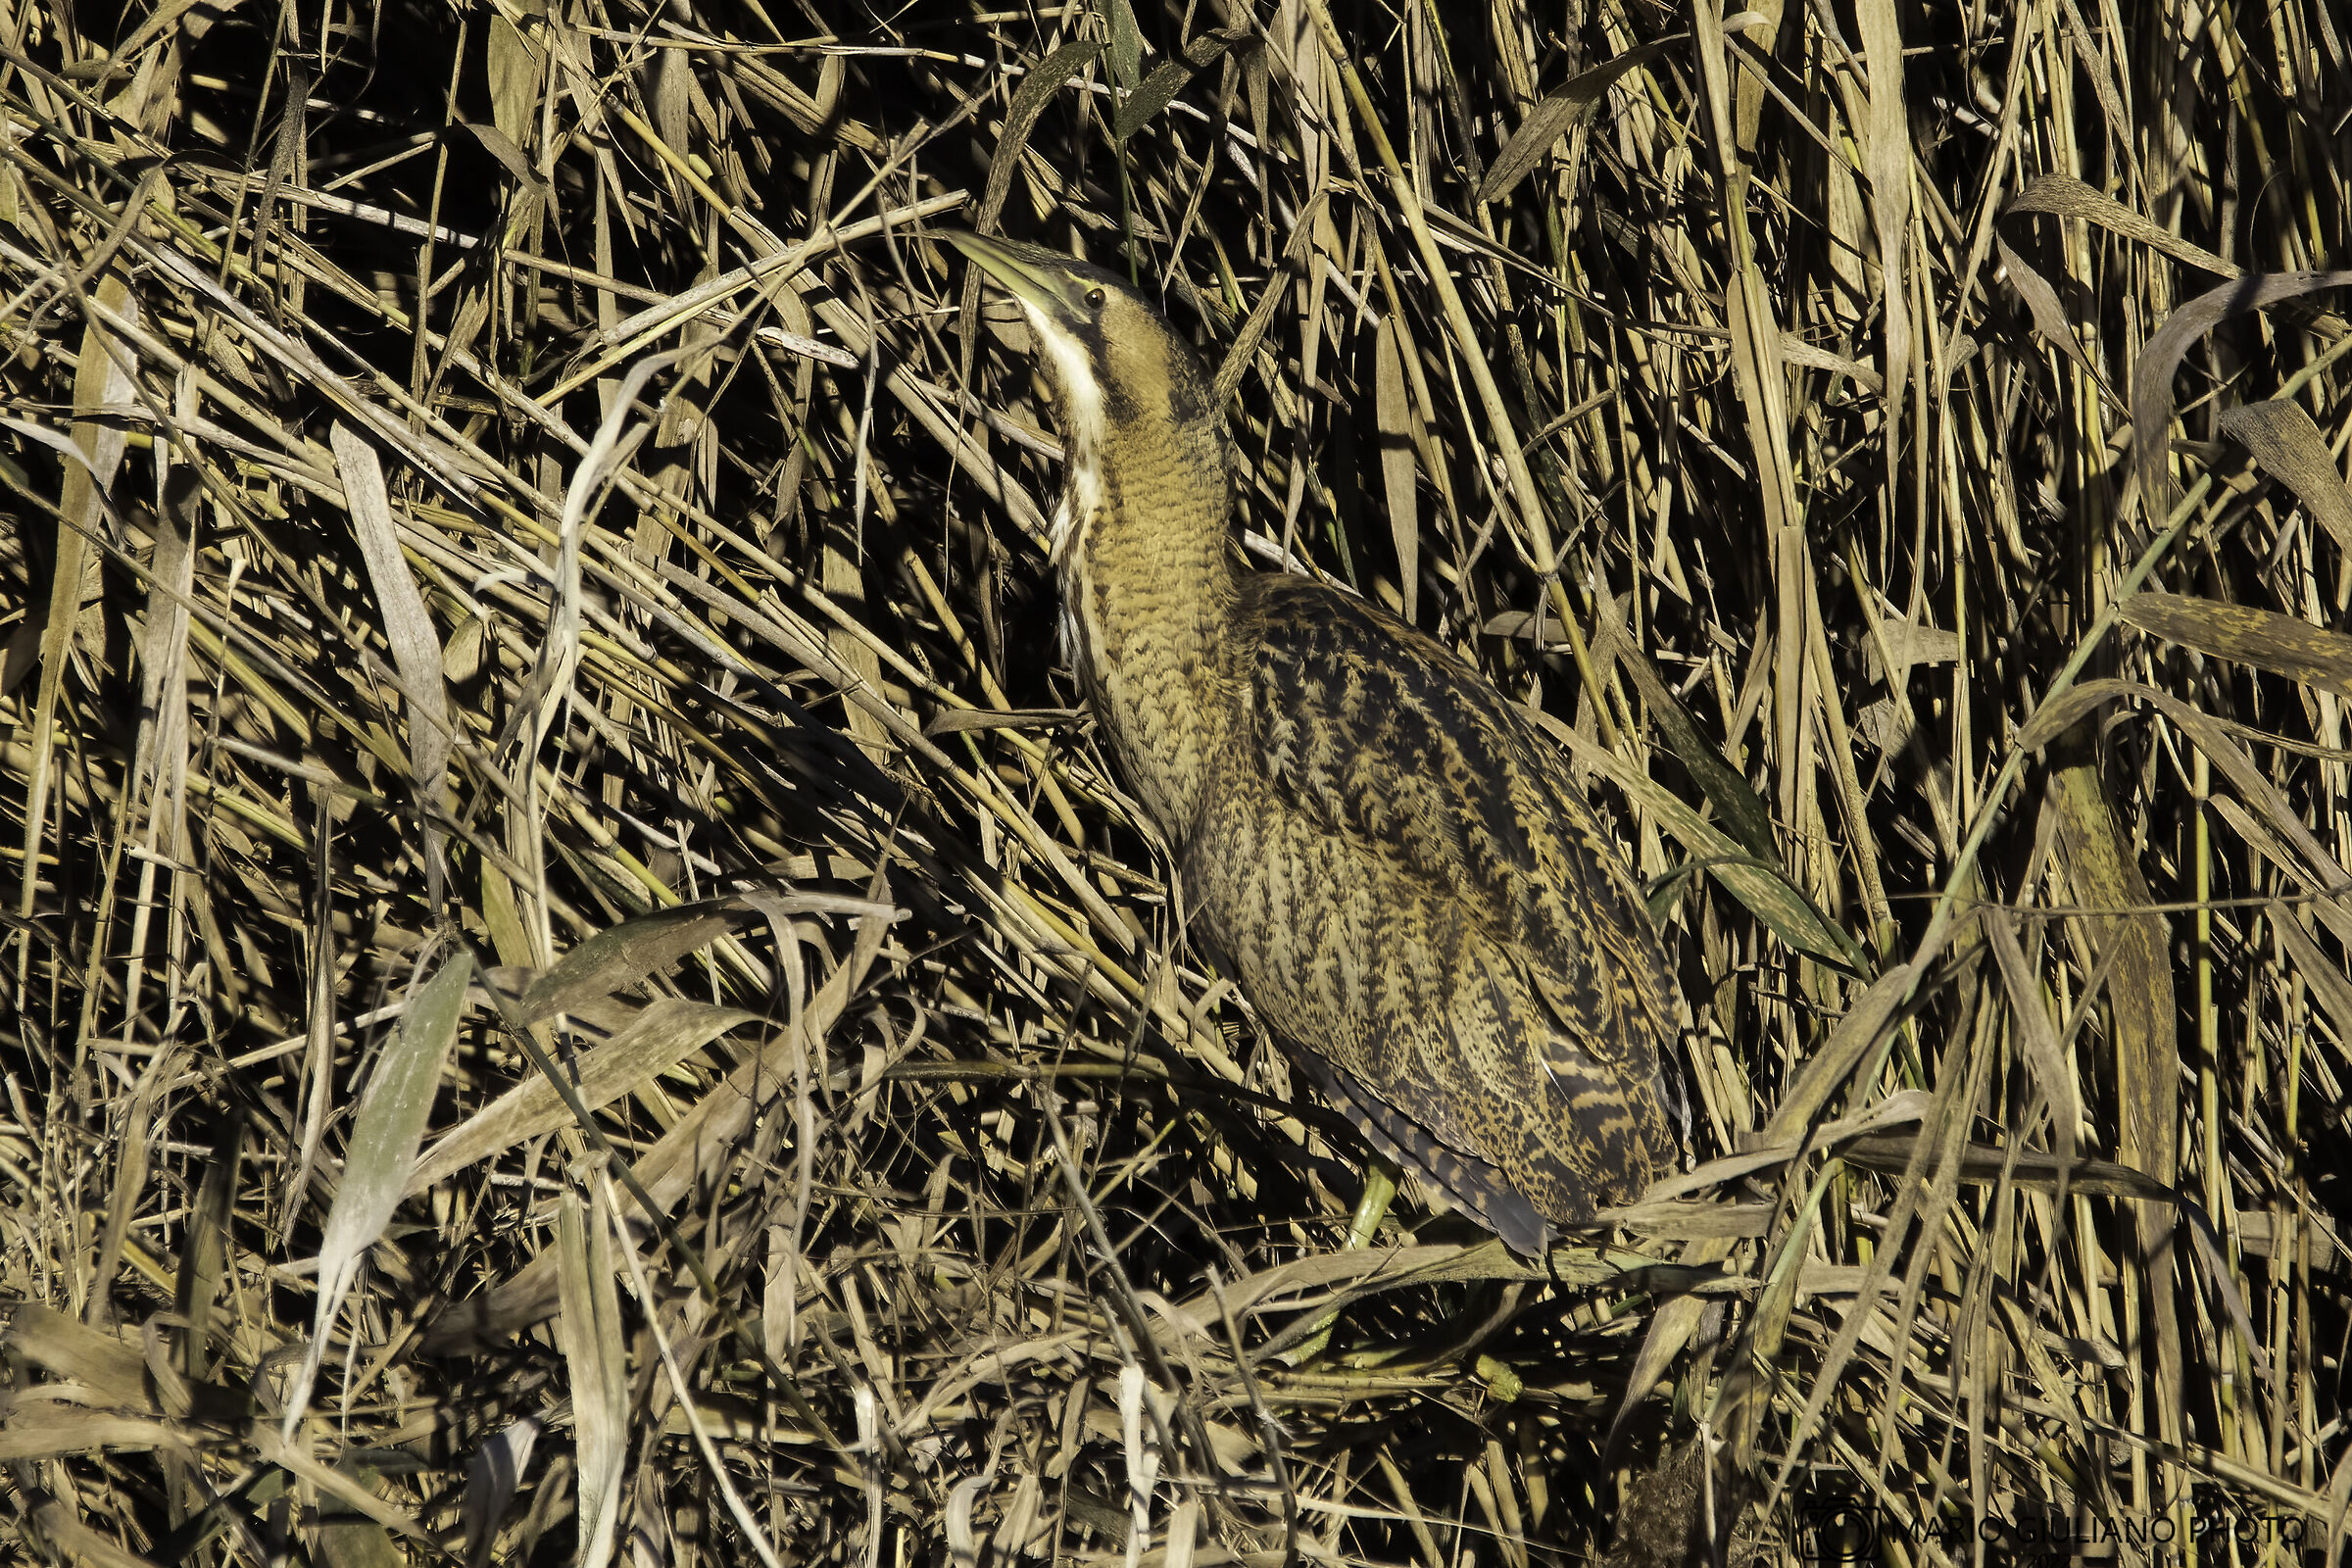 The mimicry of bittern...